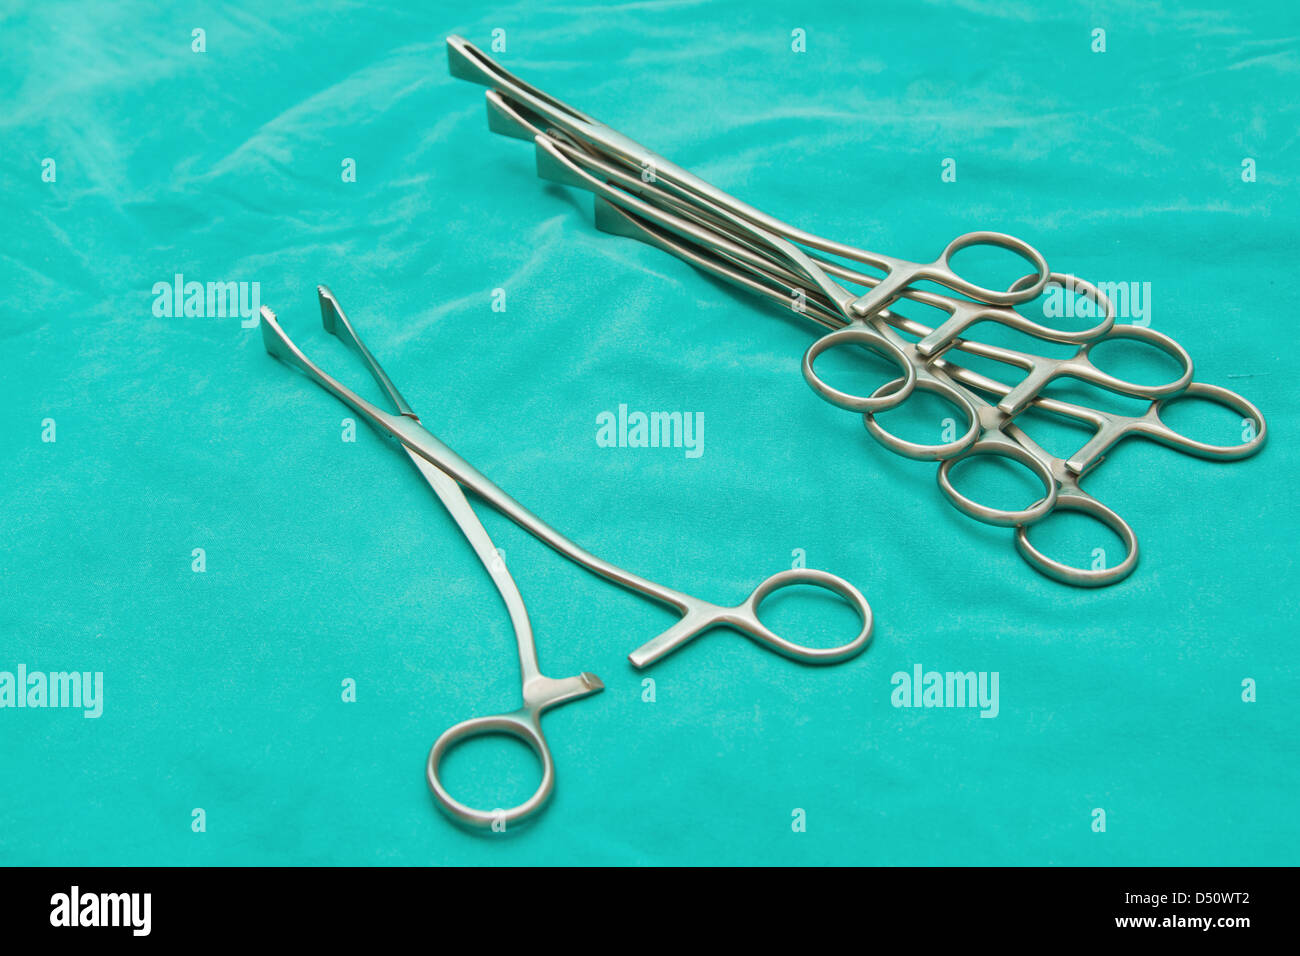 Surgical instruments on sterile table Stock Photo